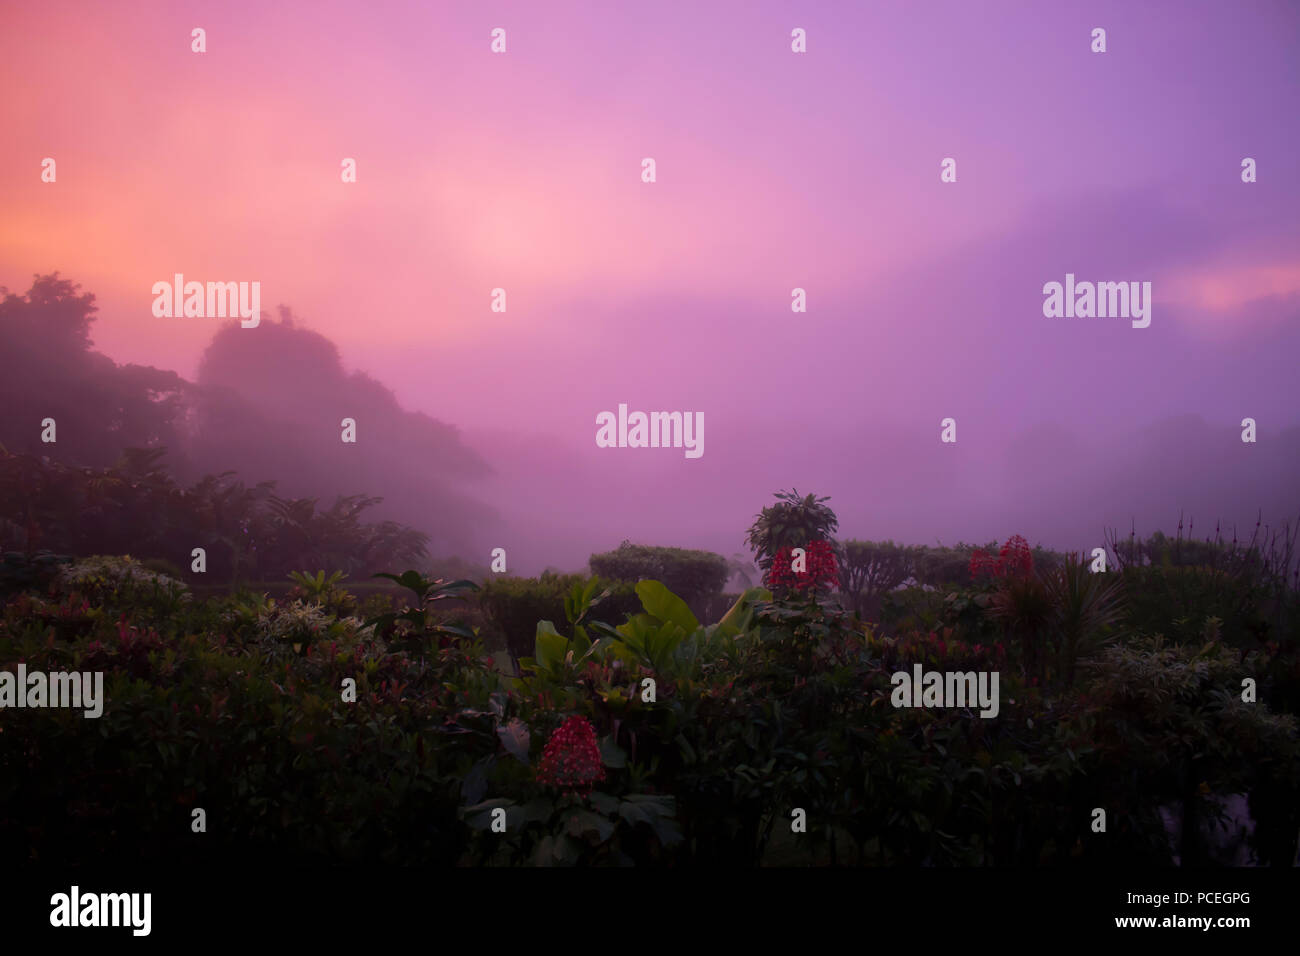 Pink and Purple Sunrise Through Mist in Jungle Stock Photo